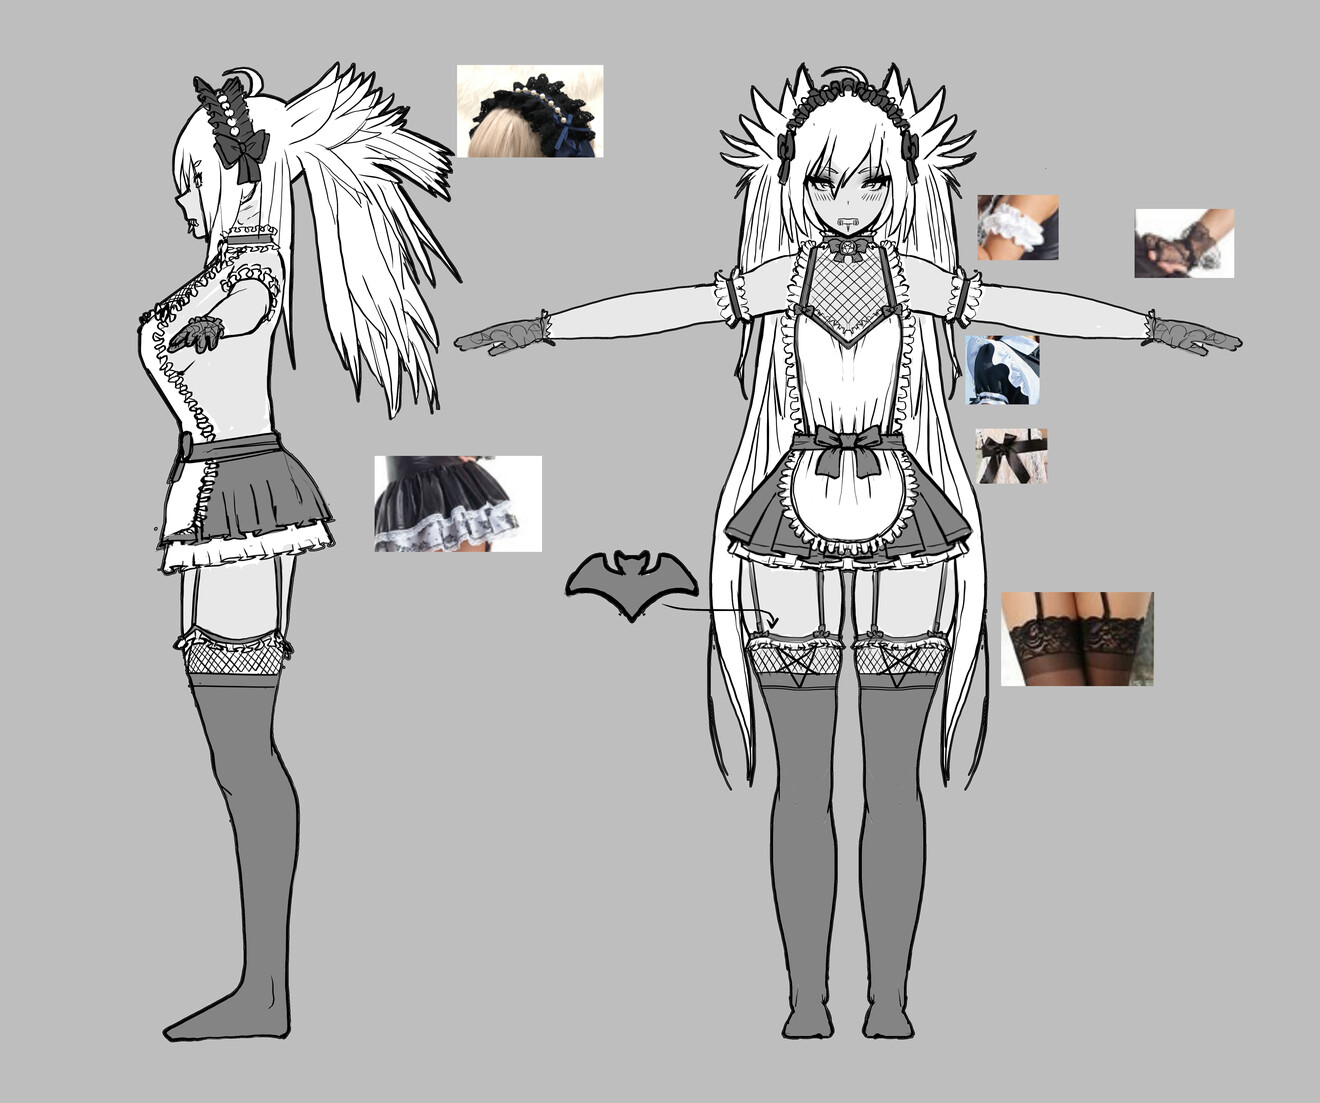 Floatharr - Maid Outfit and body base commission